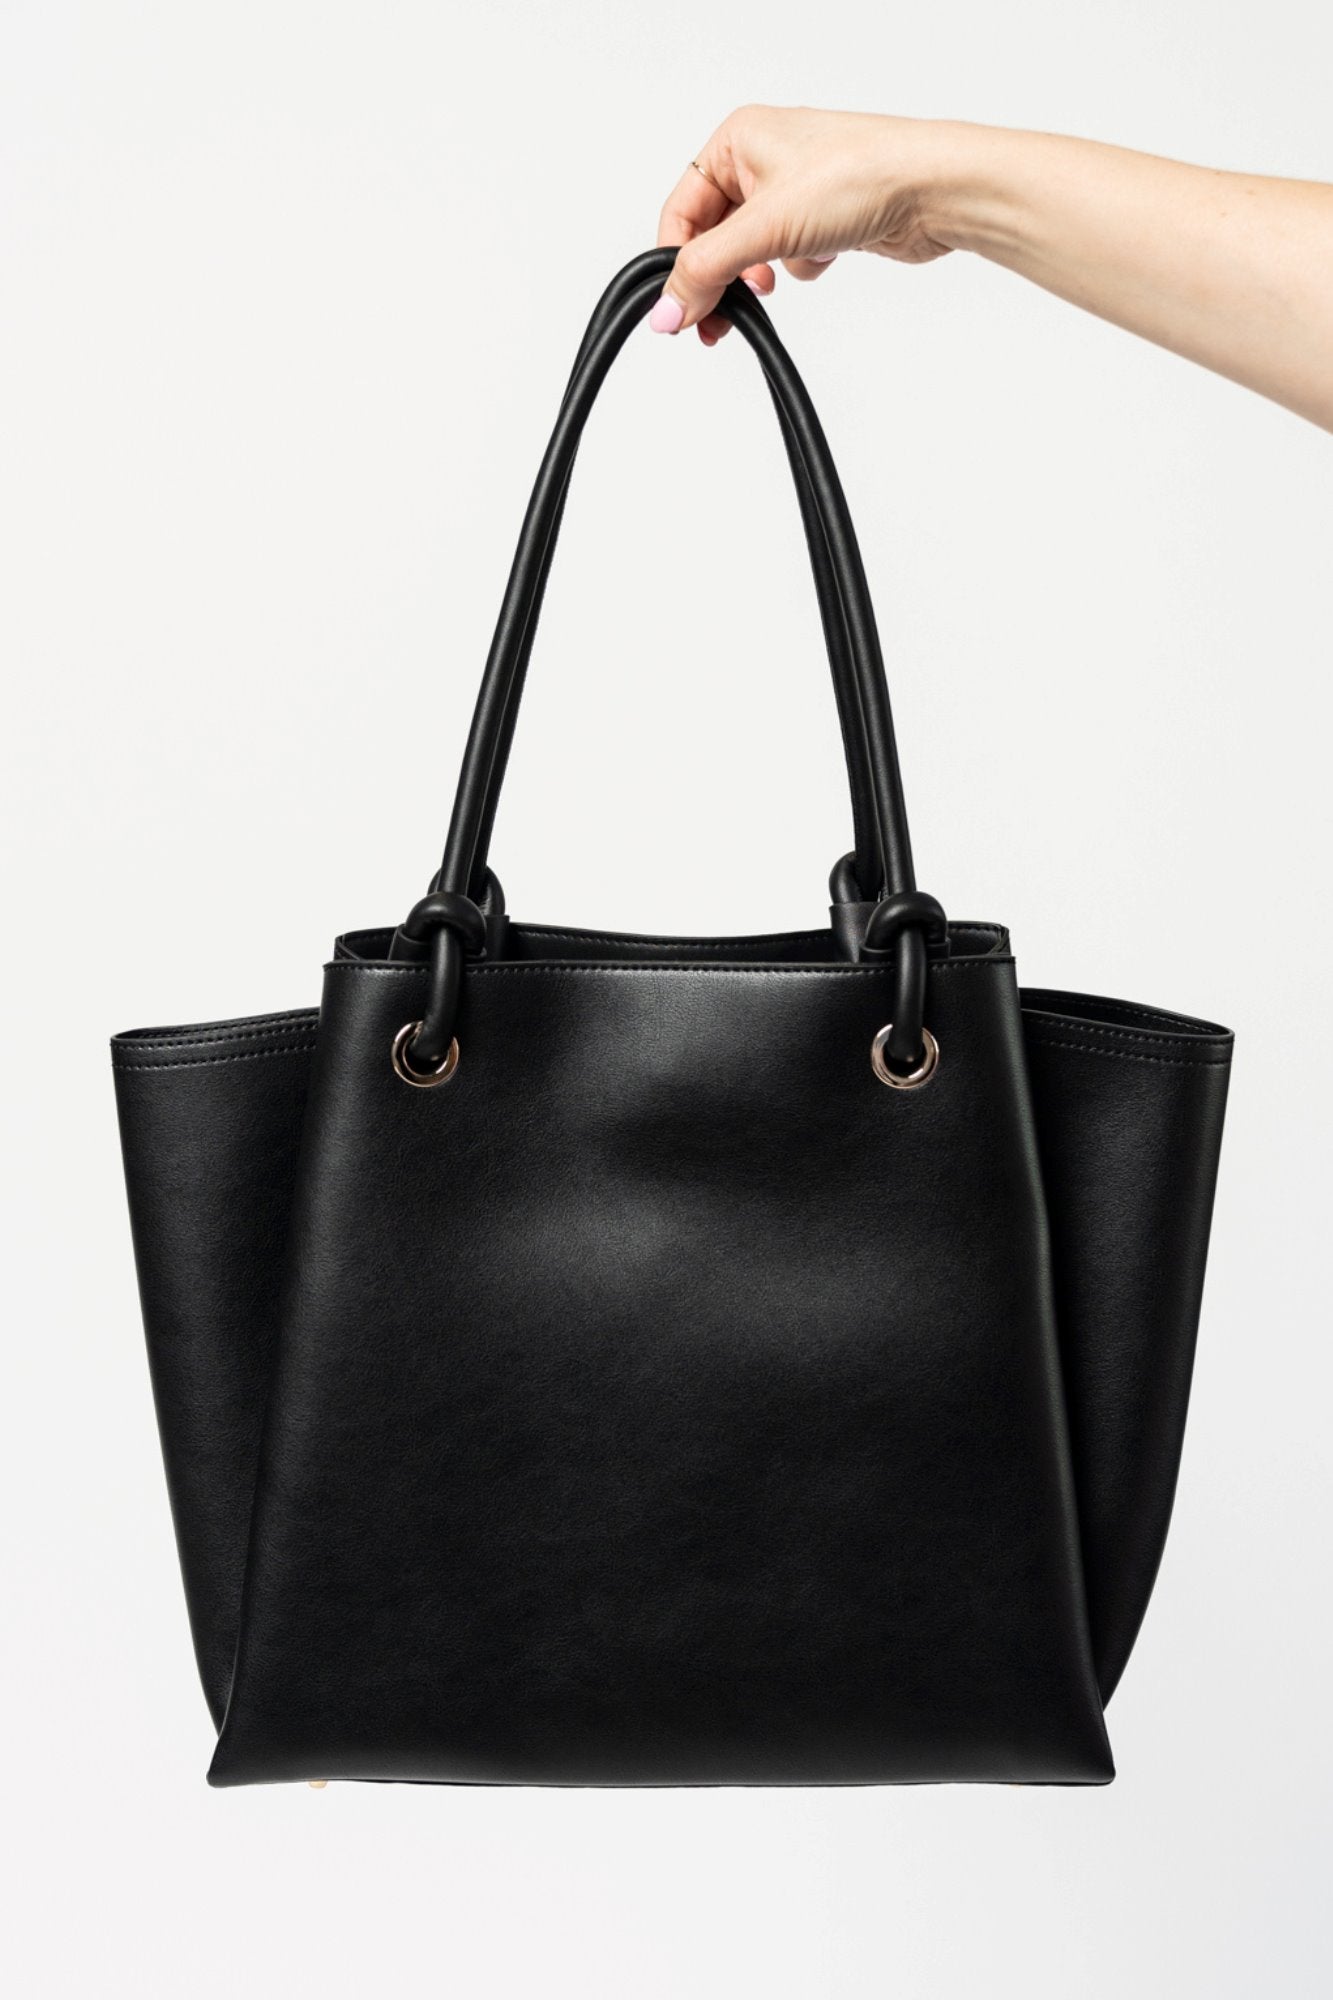 Coco Bag in Black Holley Girl 